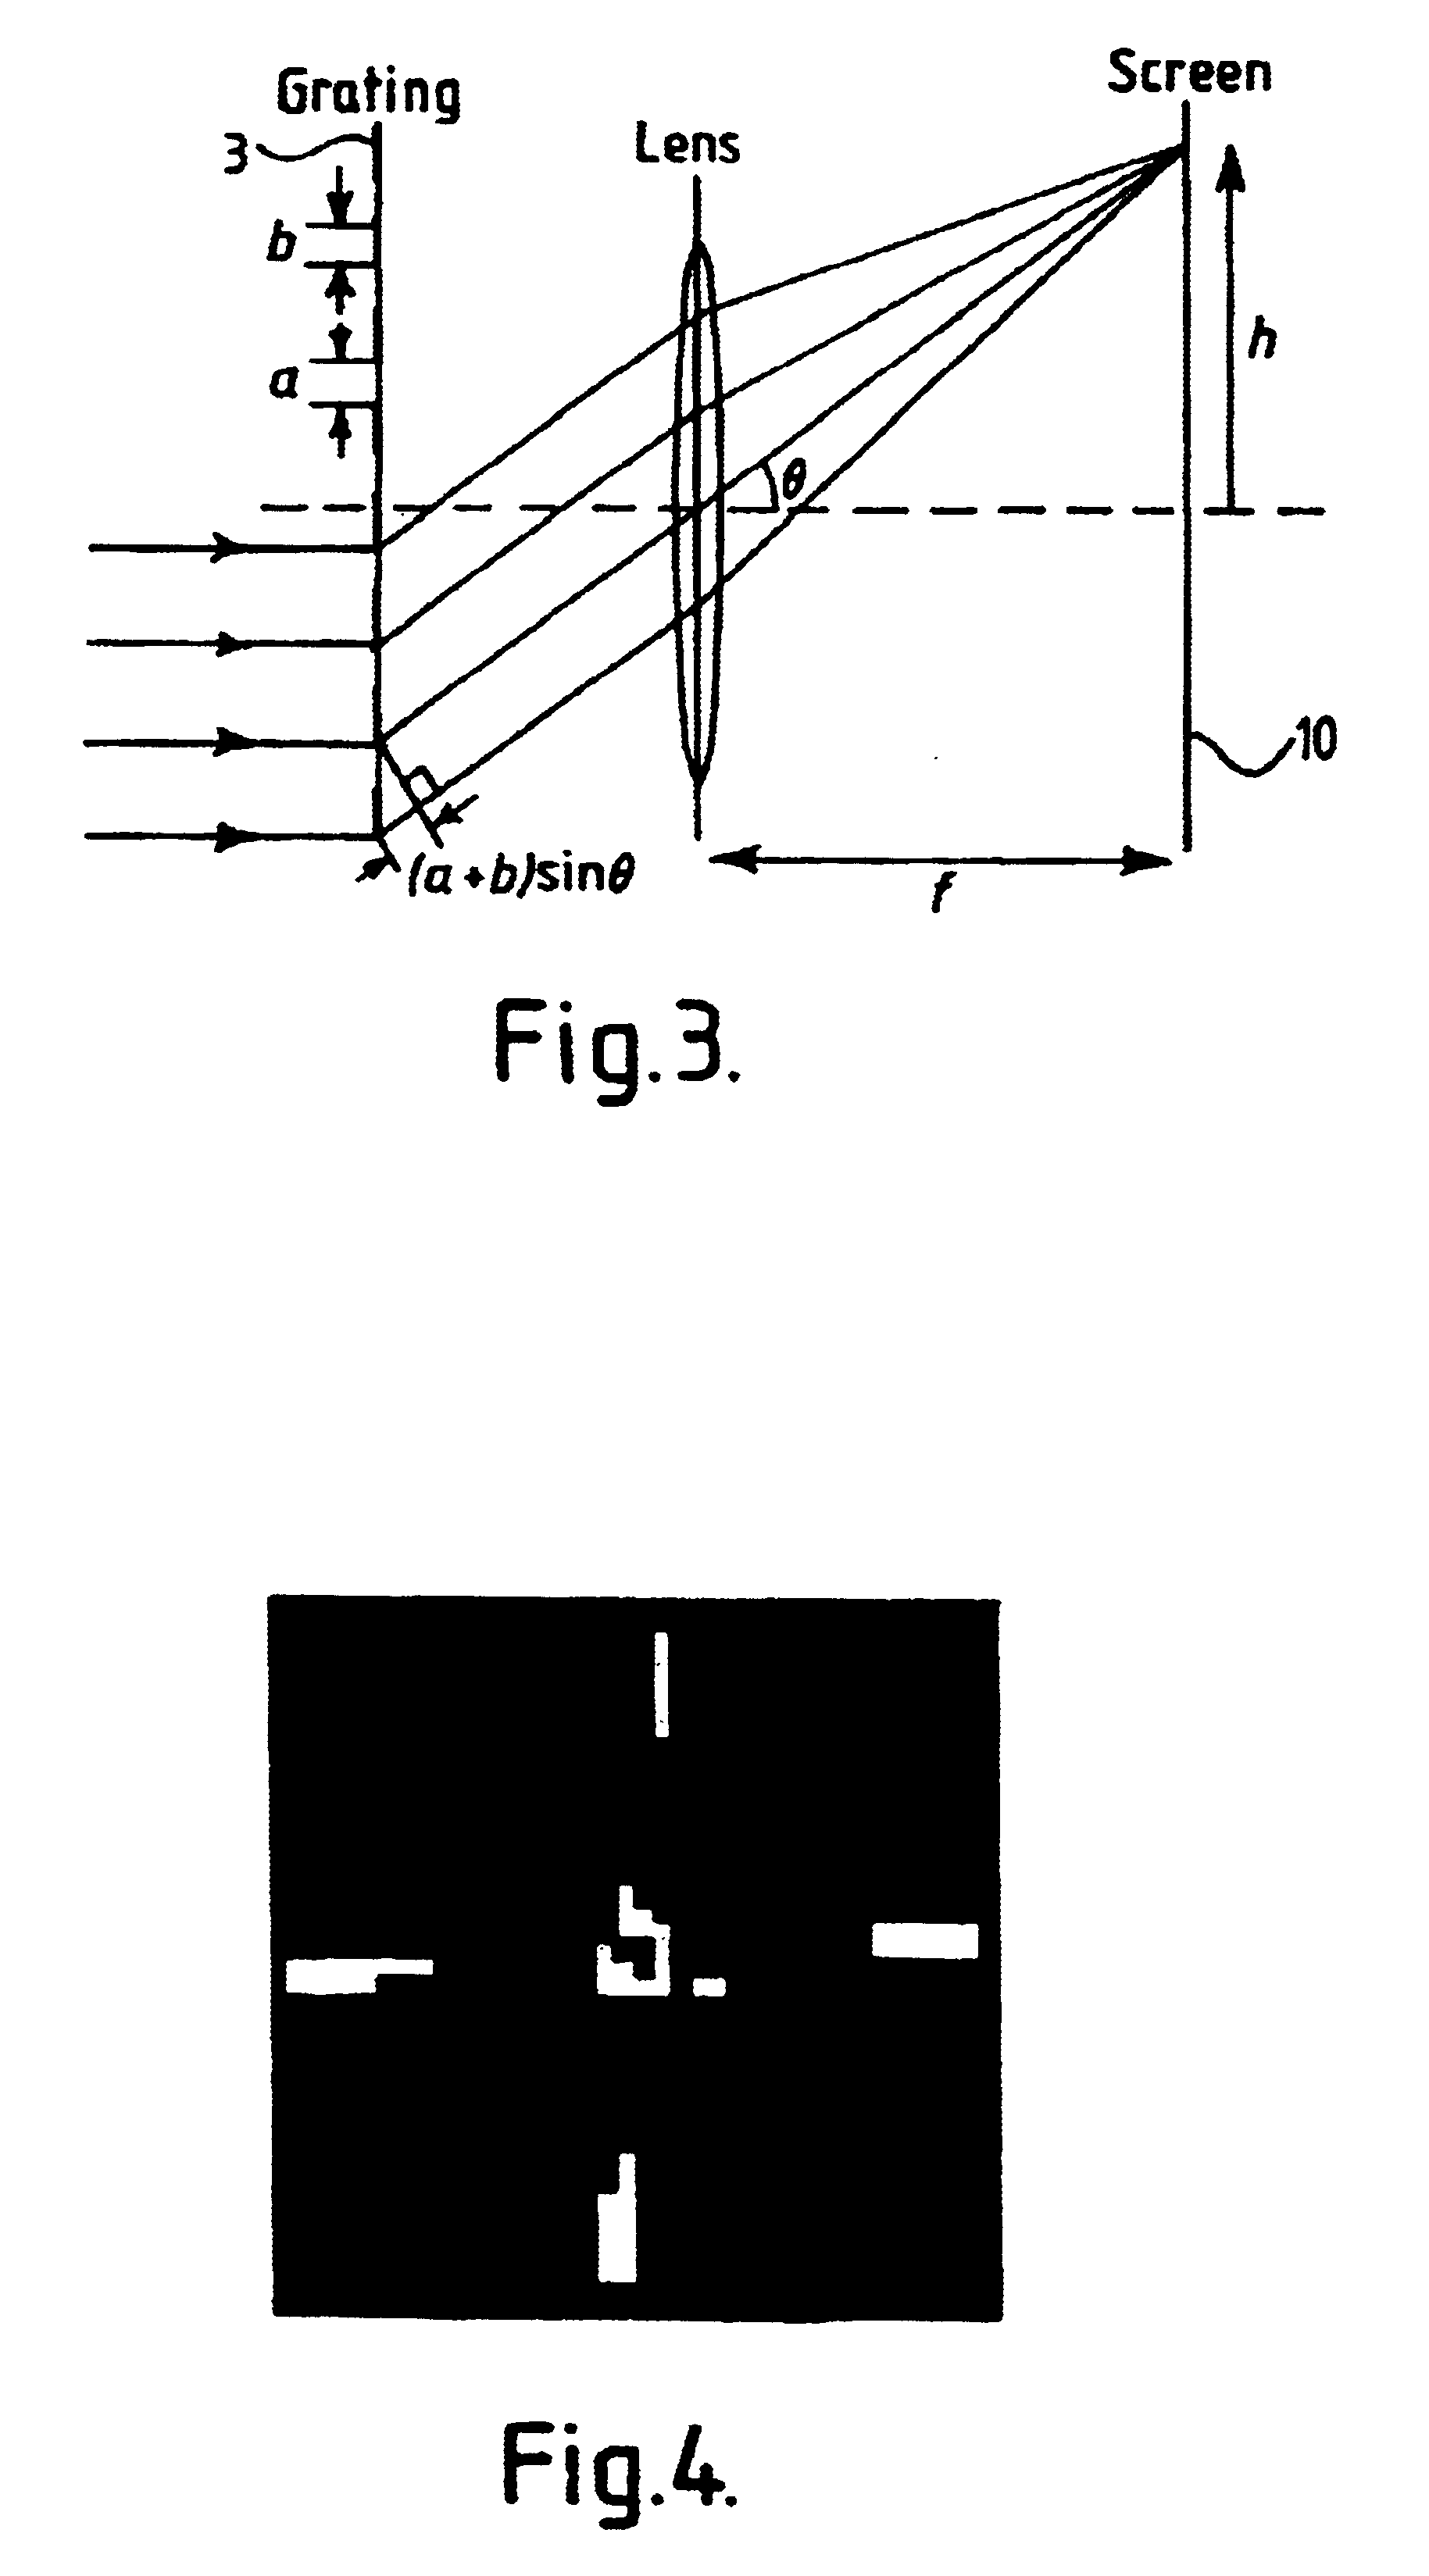 Image processing system and method for removing or compensating for diffraction spots